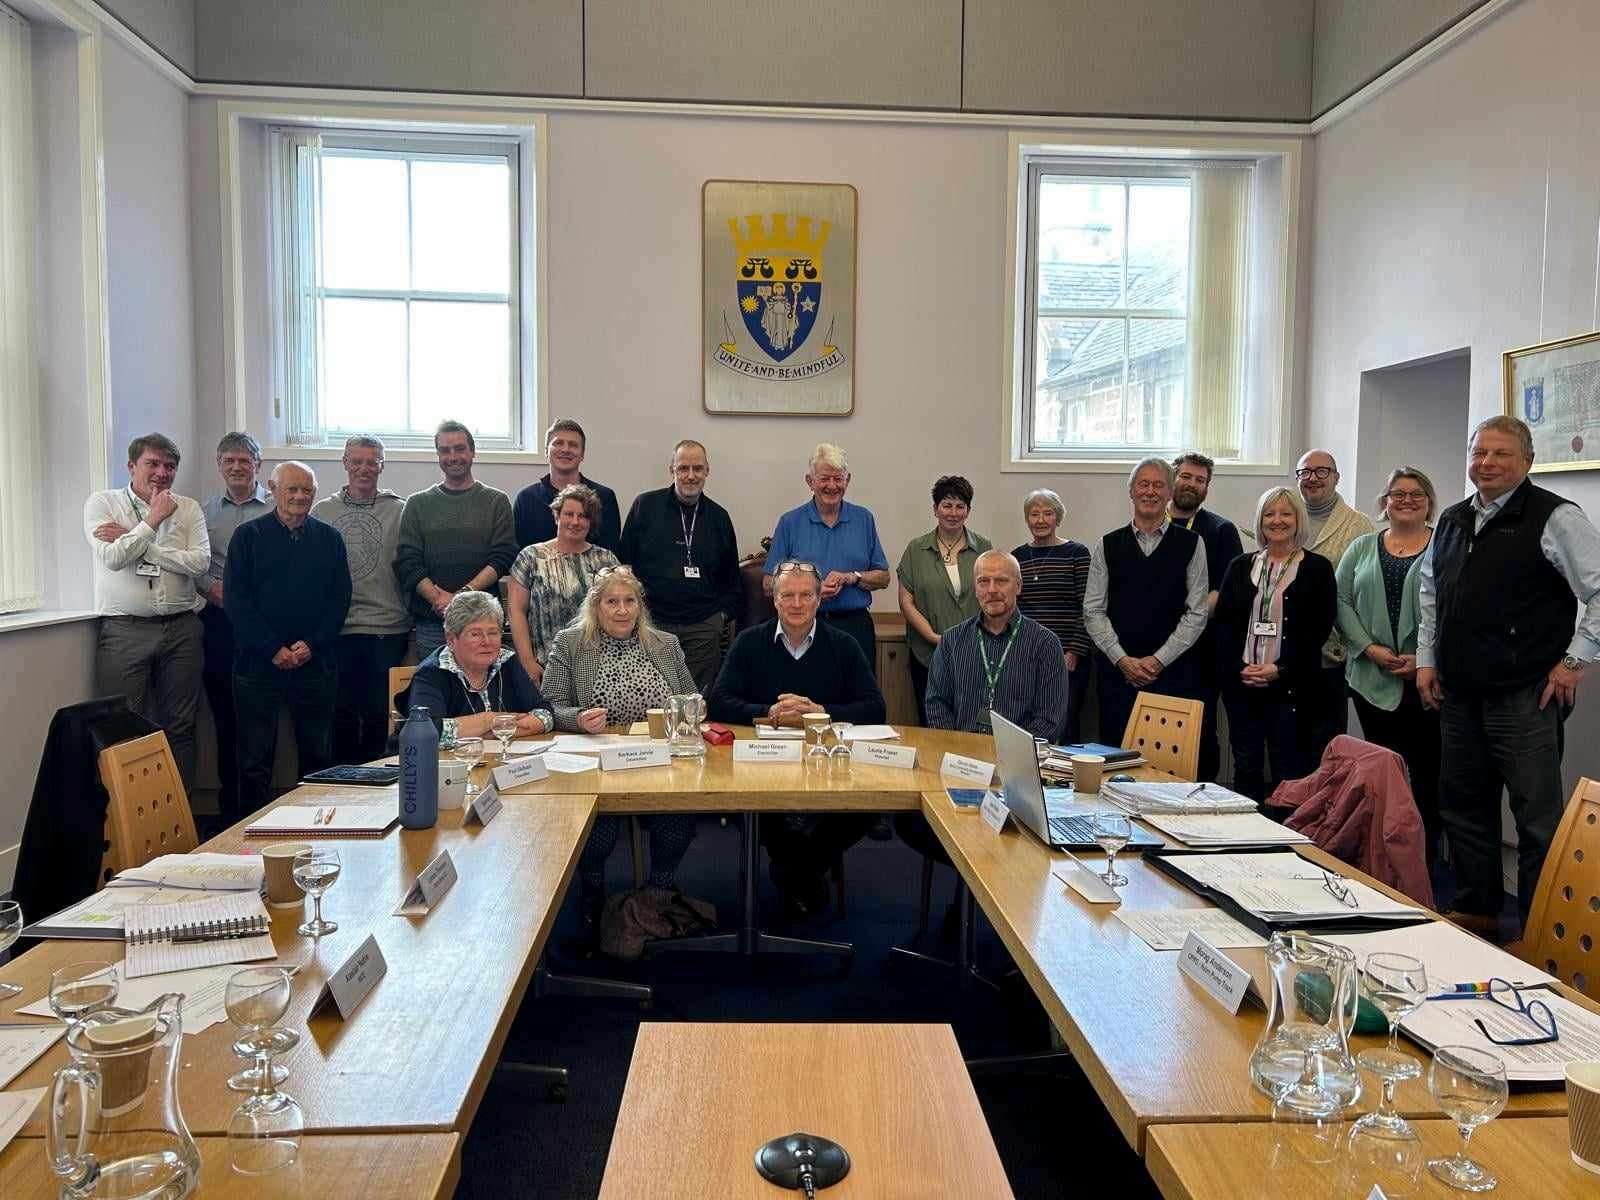 Community representatives and elected members gathered at Nairn Courthouse last week for the first meeting of the new engagement group, which is set to boost community input in the management of Nairn's Common Good Assets.